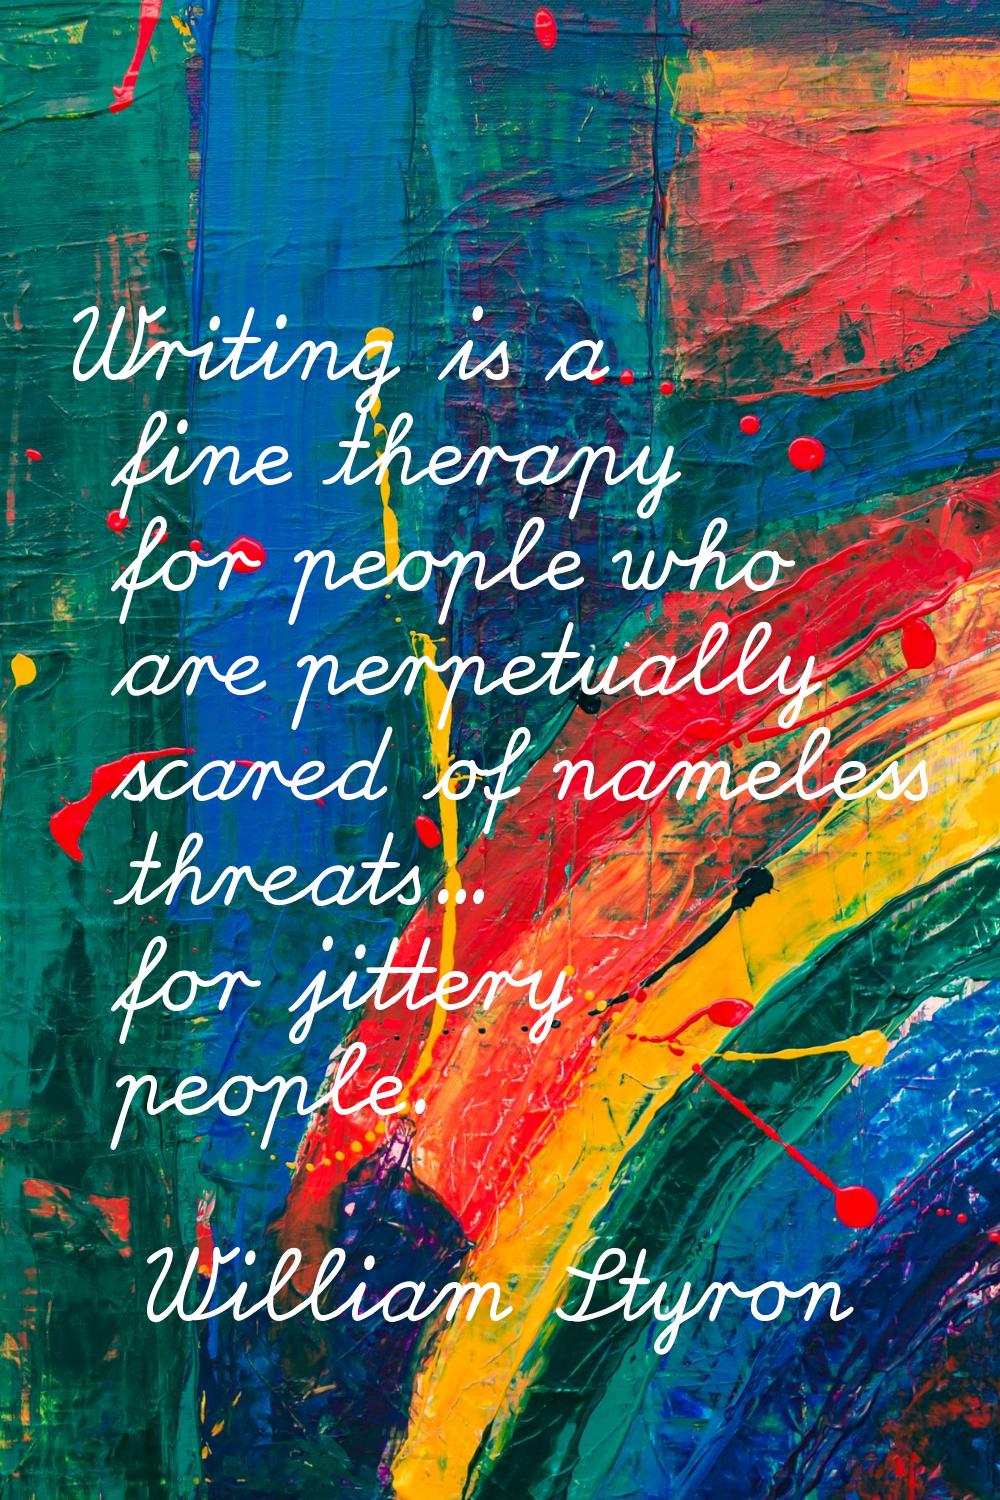 Writing is a fine therapy for people who are perpetually scared of nameless threats... for jittery 